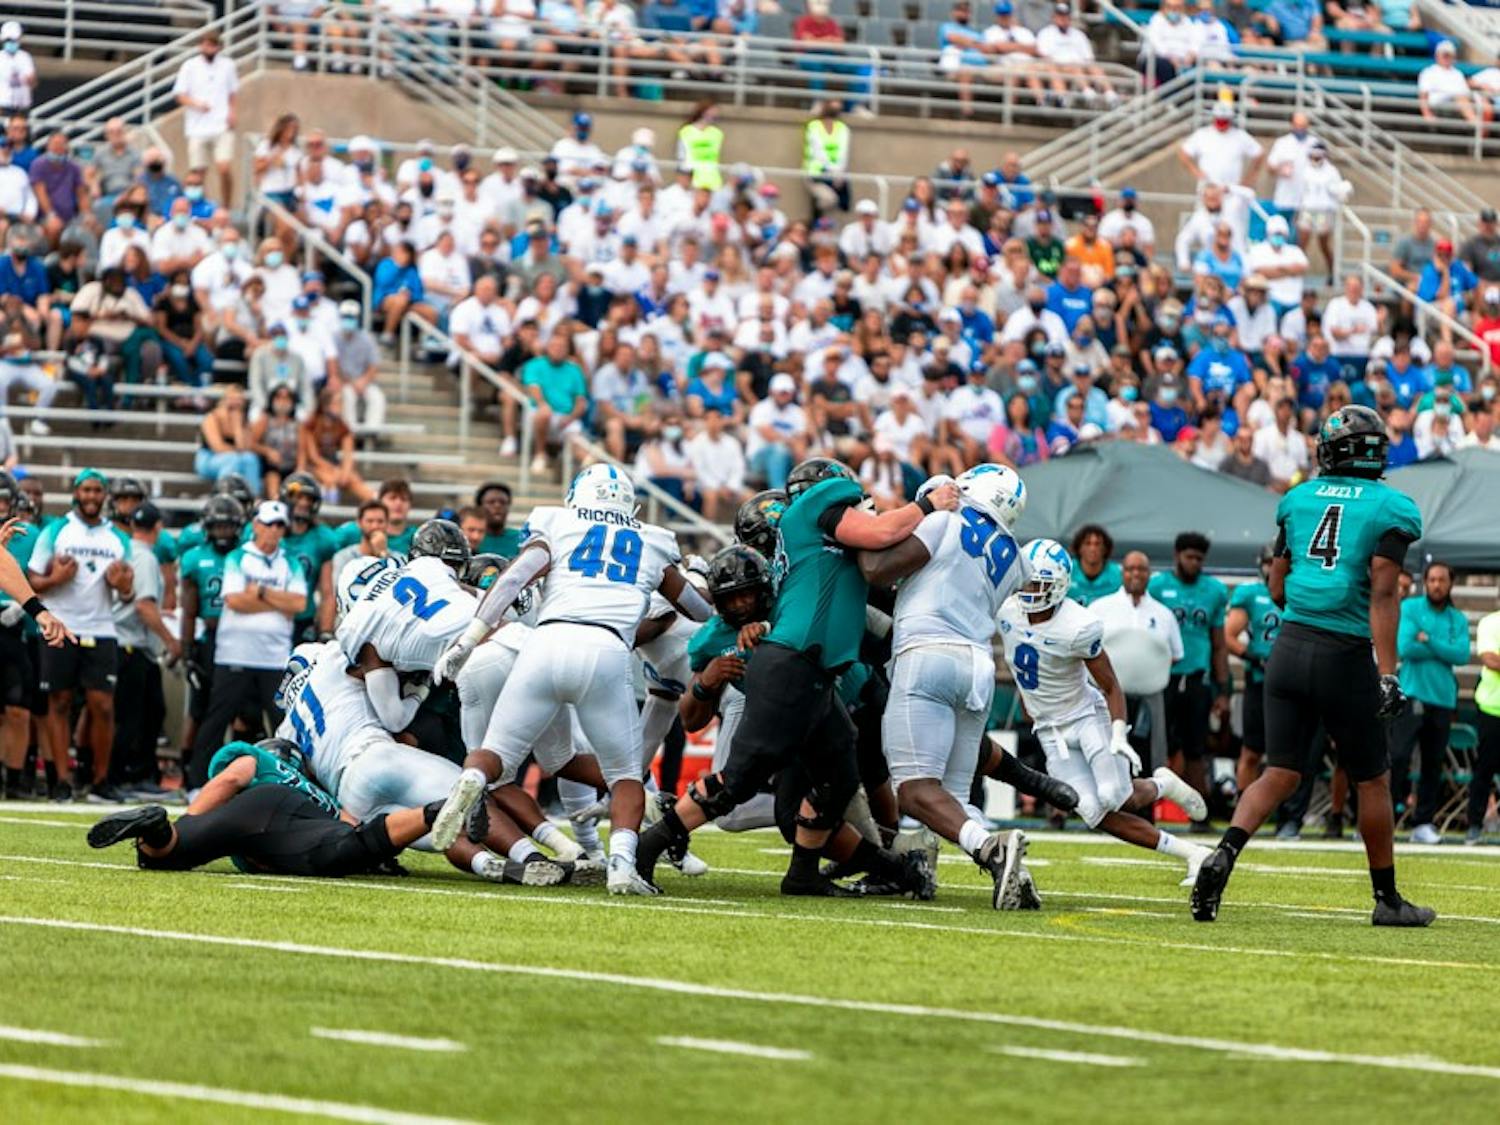 Despite a valiant effort against one of the top teams in the nation, Coastal Carolina’s highly efficient multiple offense scheme proved to be too much for the Bulls on Saturday.